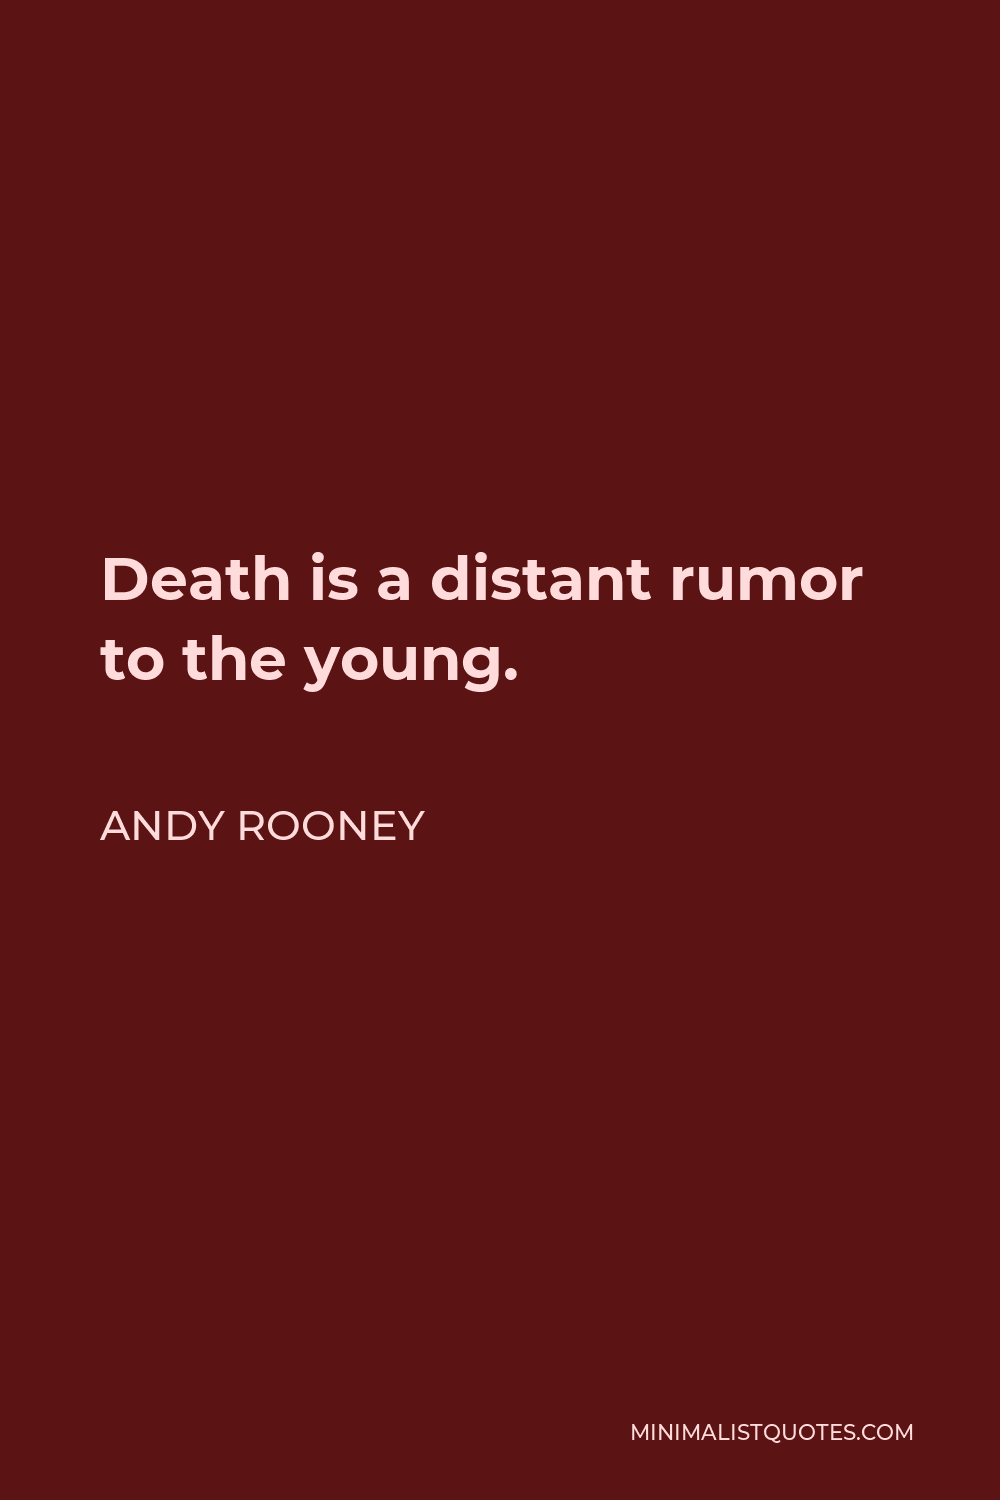 Andy Rooney Quote - Death is a distant rumor to the young.